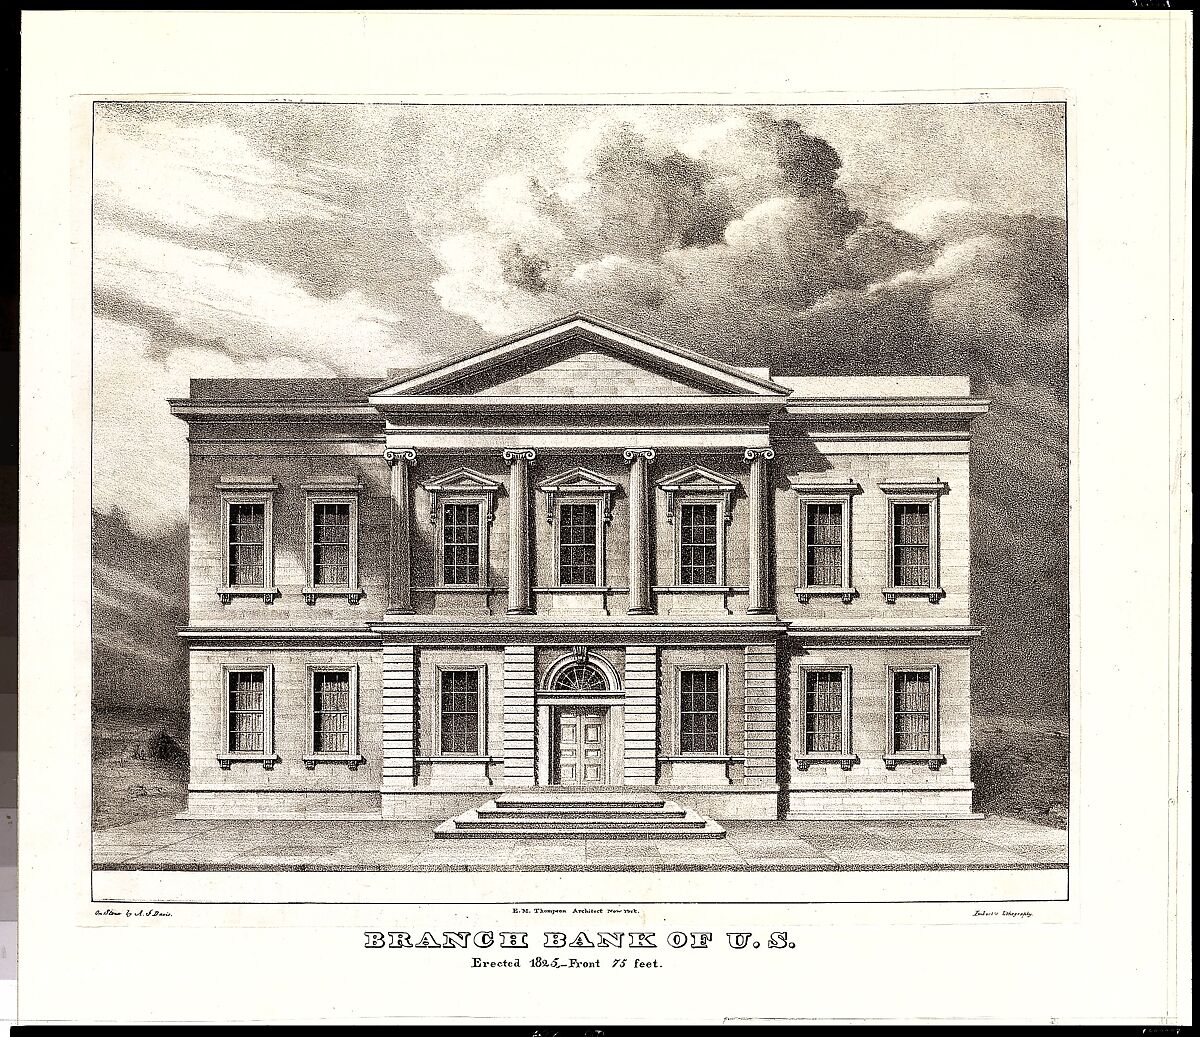 The Branch Bank of the United States, Wall Street, New York, Erected in 1825 (from Views of the Public Buildings in the City of New York Correctly Drawn on Stone by A. J. Davis, 1827), Anthony Imbert (American, born France, active New York 1825–ca. 1838), Lithograph 